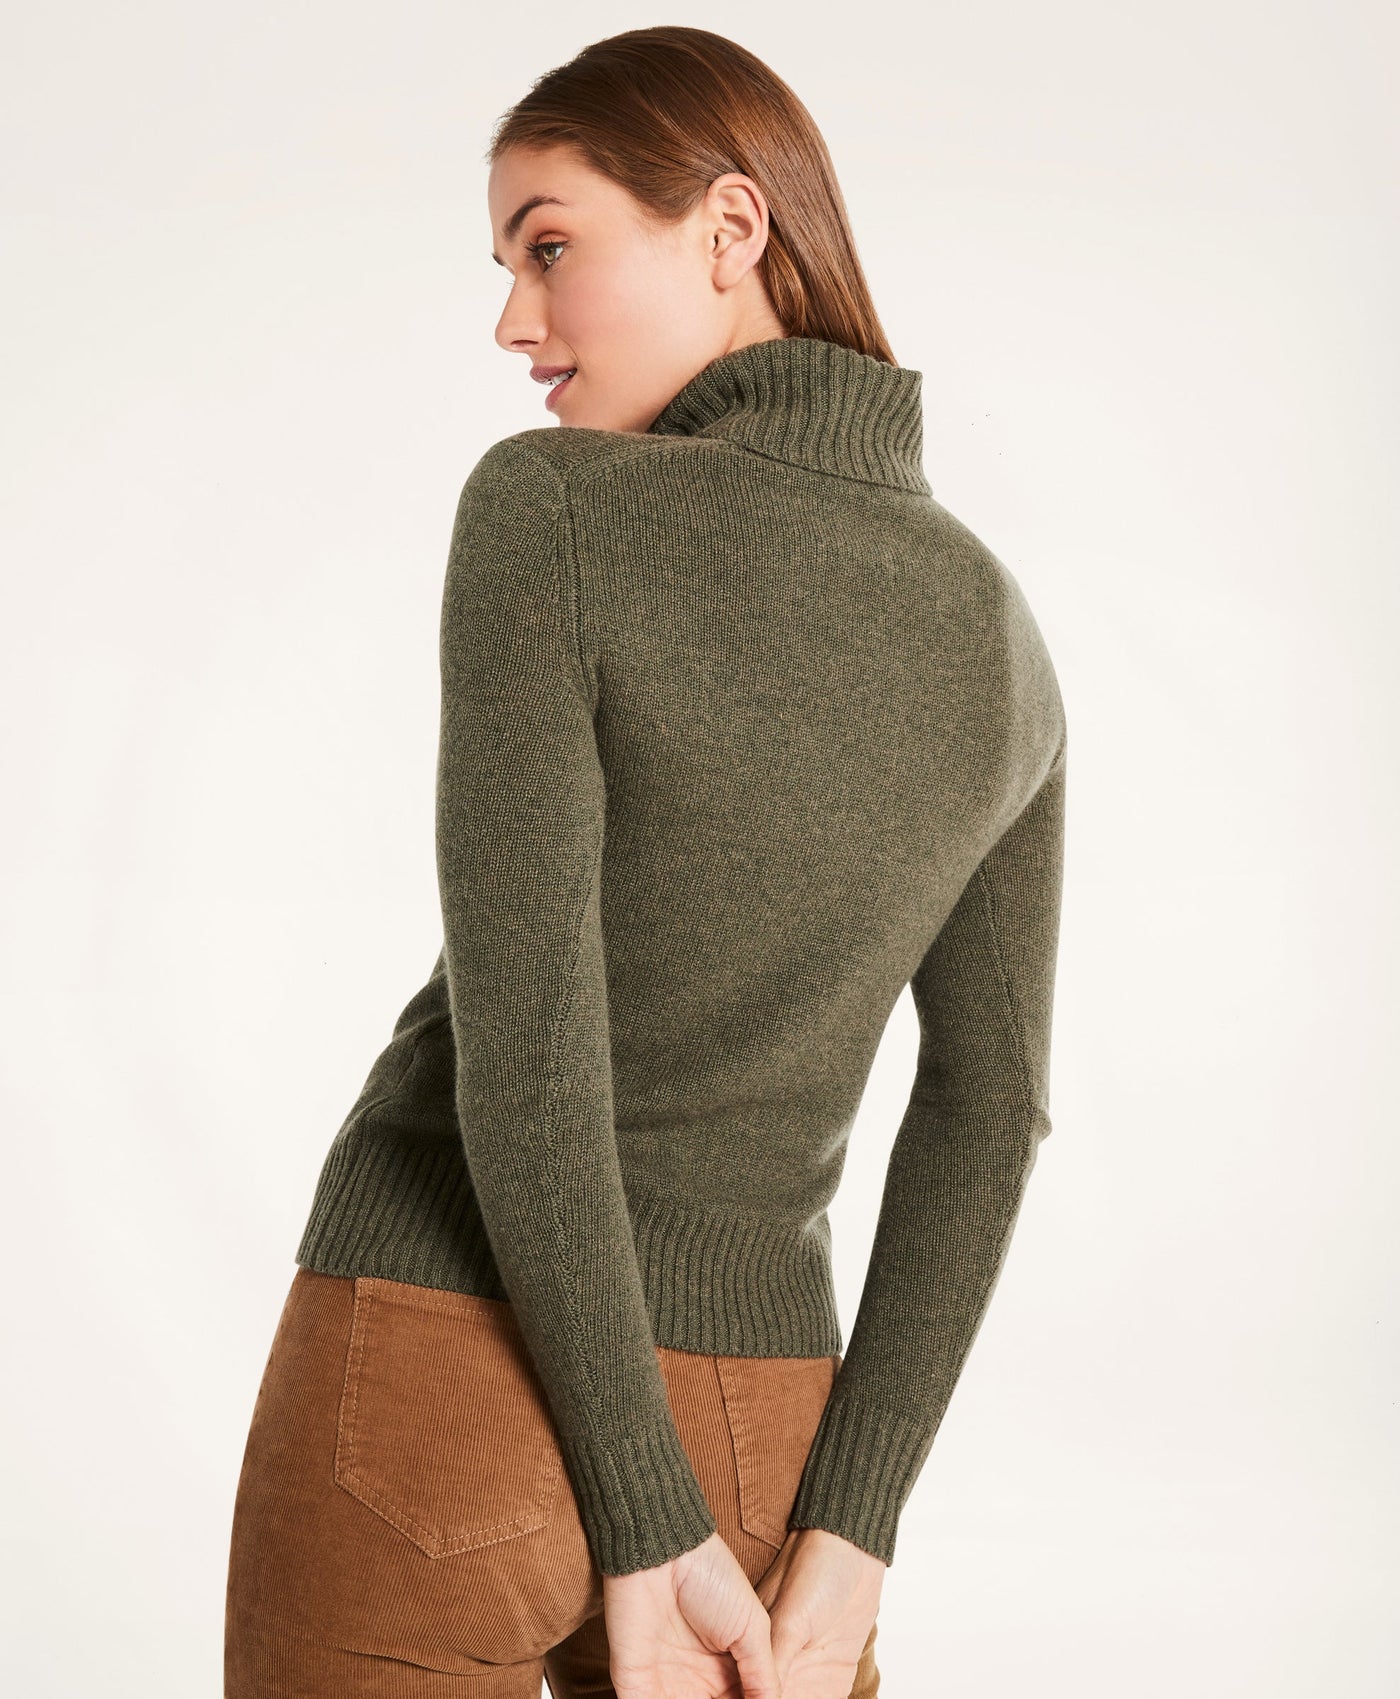 Cashmere Knit Turtleneck Sweater - Brooks Brothers Canada